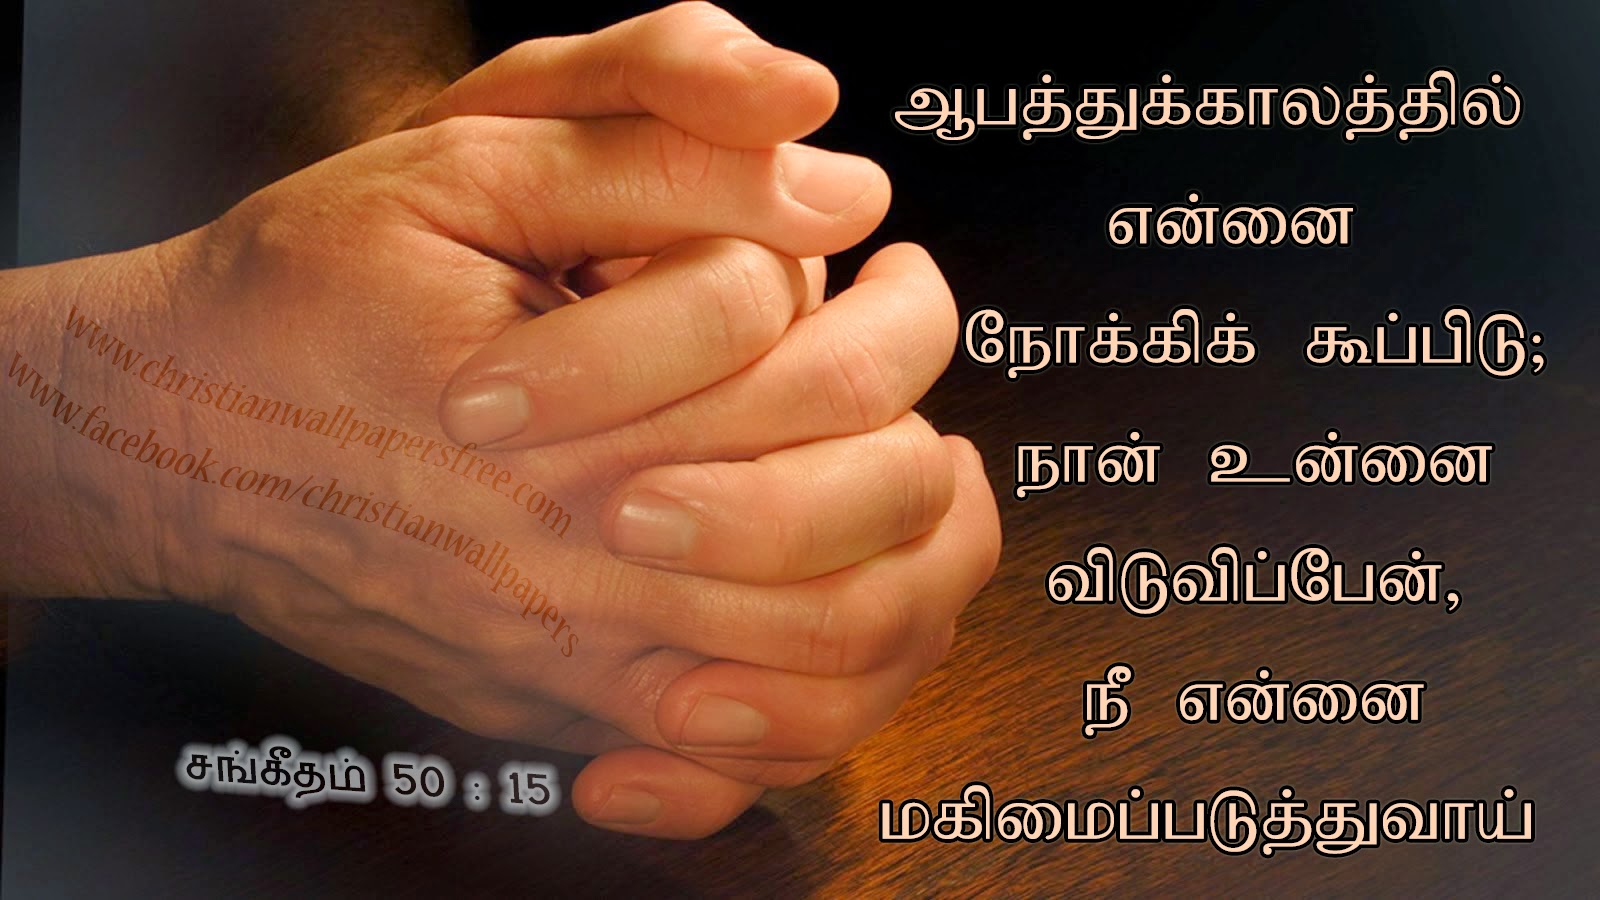 Tamil Christian Wallpapers: Tamil Christian Bible Verse Free Download